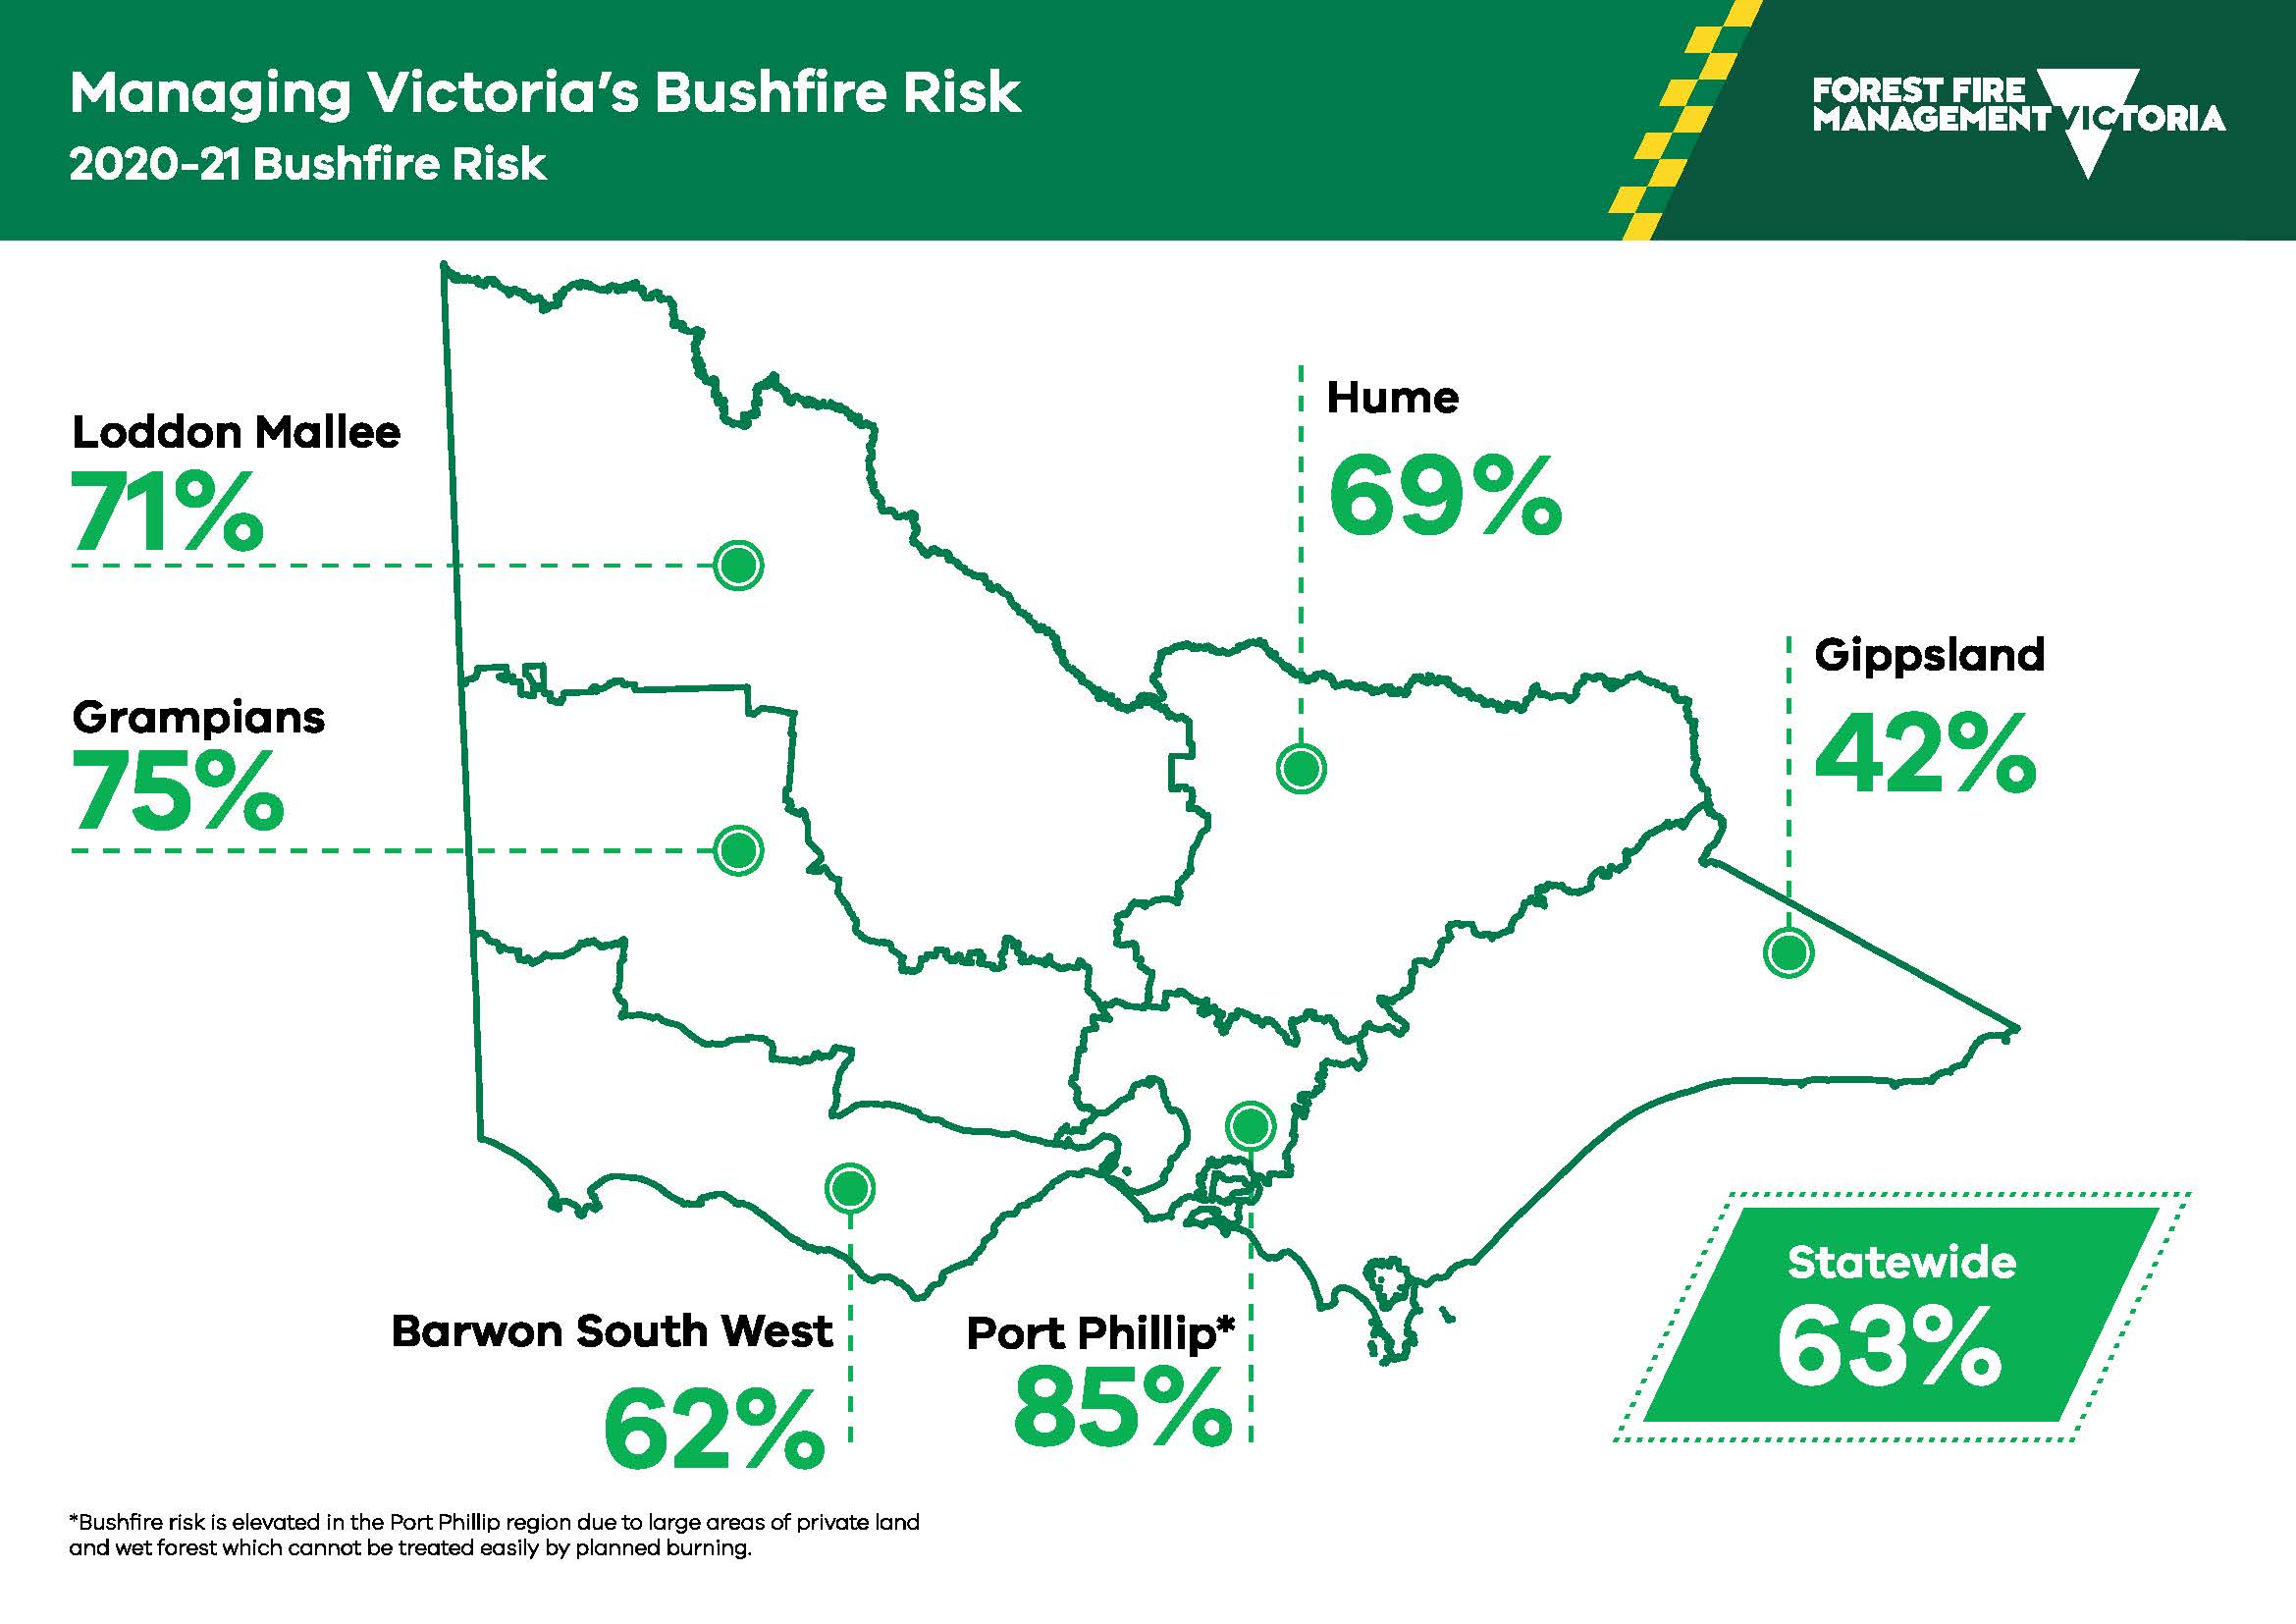 Bushfire risk across the state of Victoria in 2020-21. Statewide risk was 63%, Loddon Mallee region was 71%, Hume region was 69%, Gippsland region was 42%, Port Phillip region was 85% (Bushfire risk is elevated in Port Phillip region due to large areas of private land and wet forests which cannot be treated easily by planned burning), Barwon South West region 62%, Grampians region 75%. 